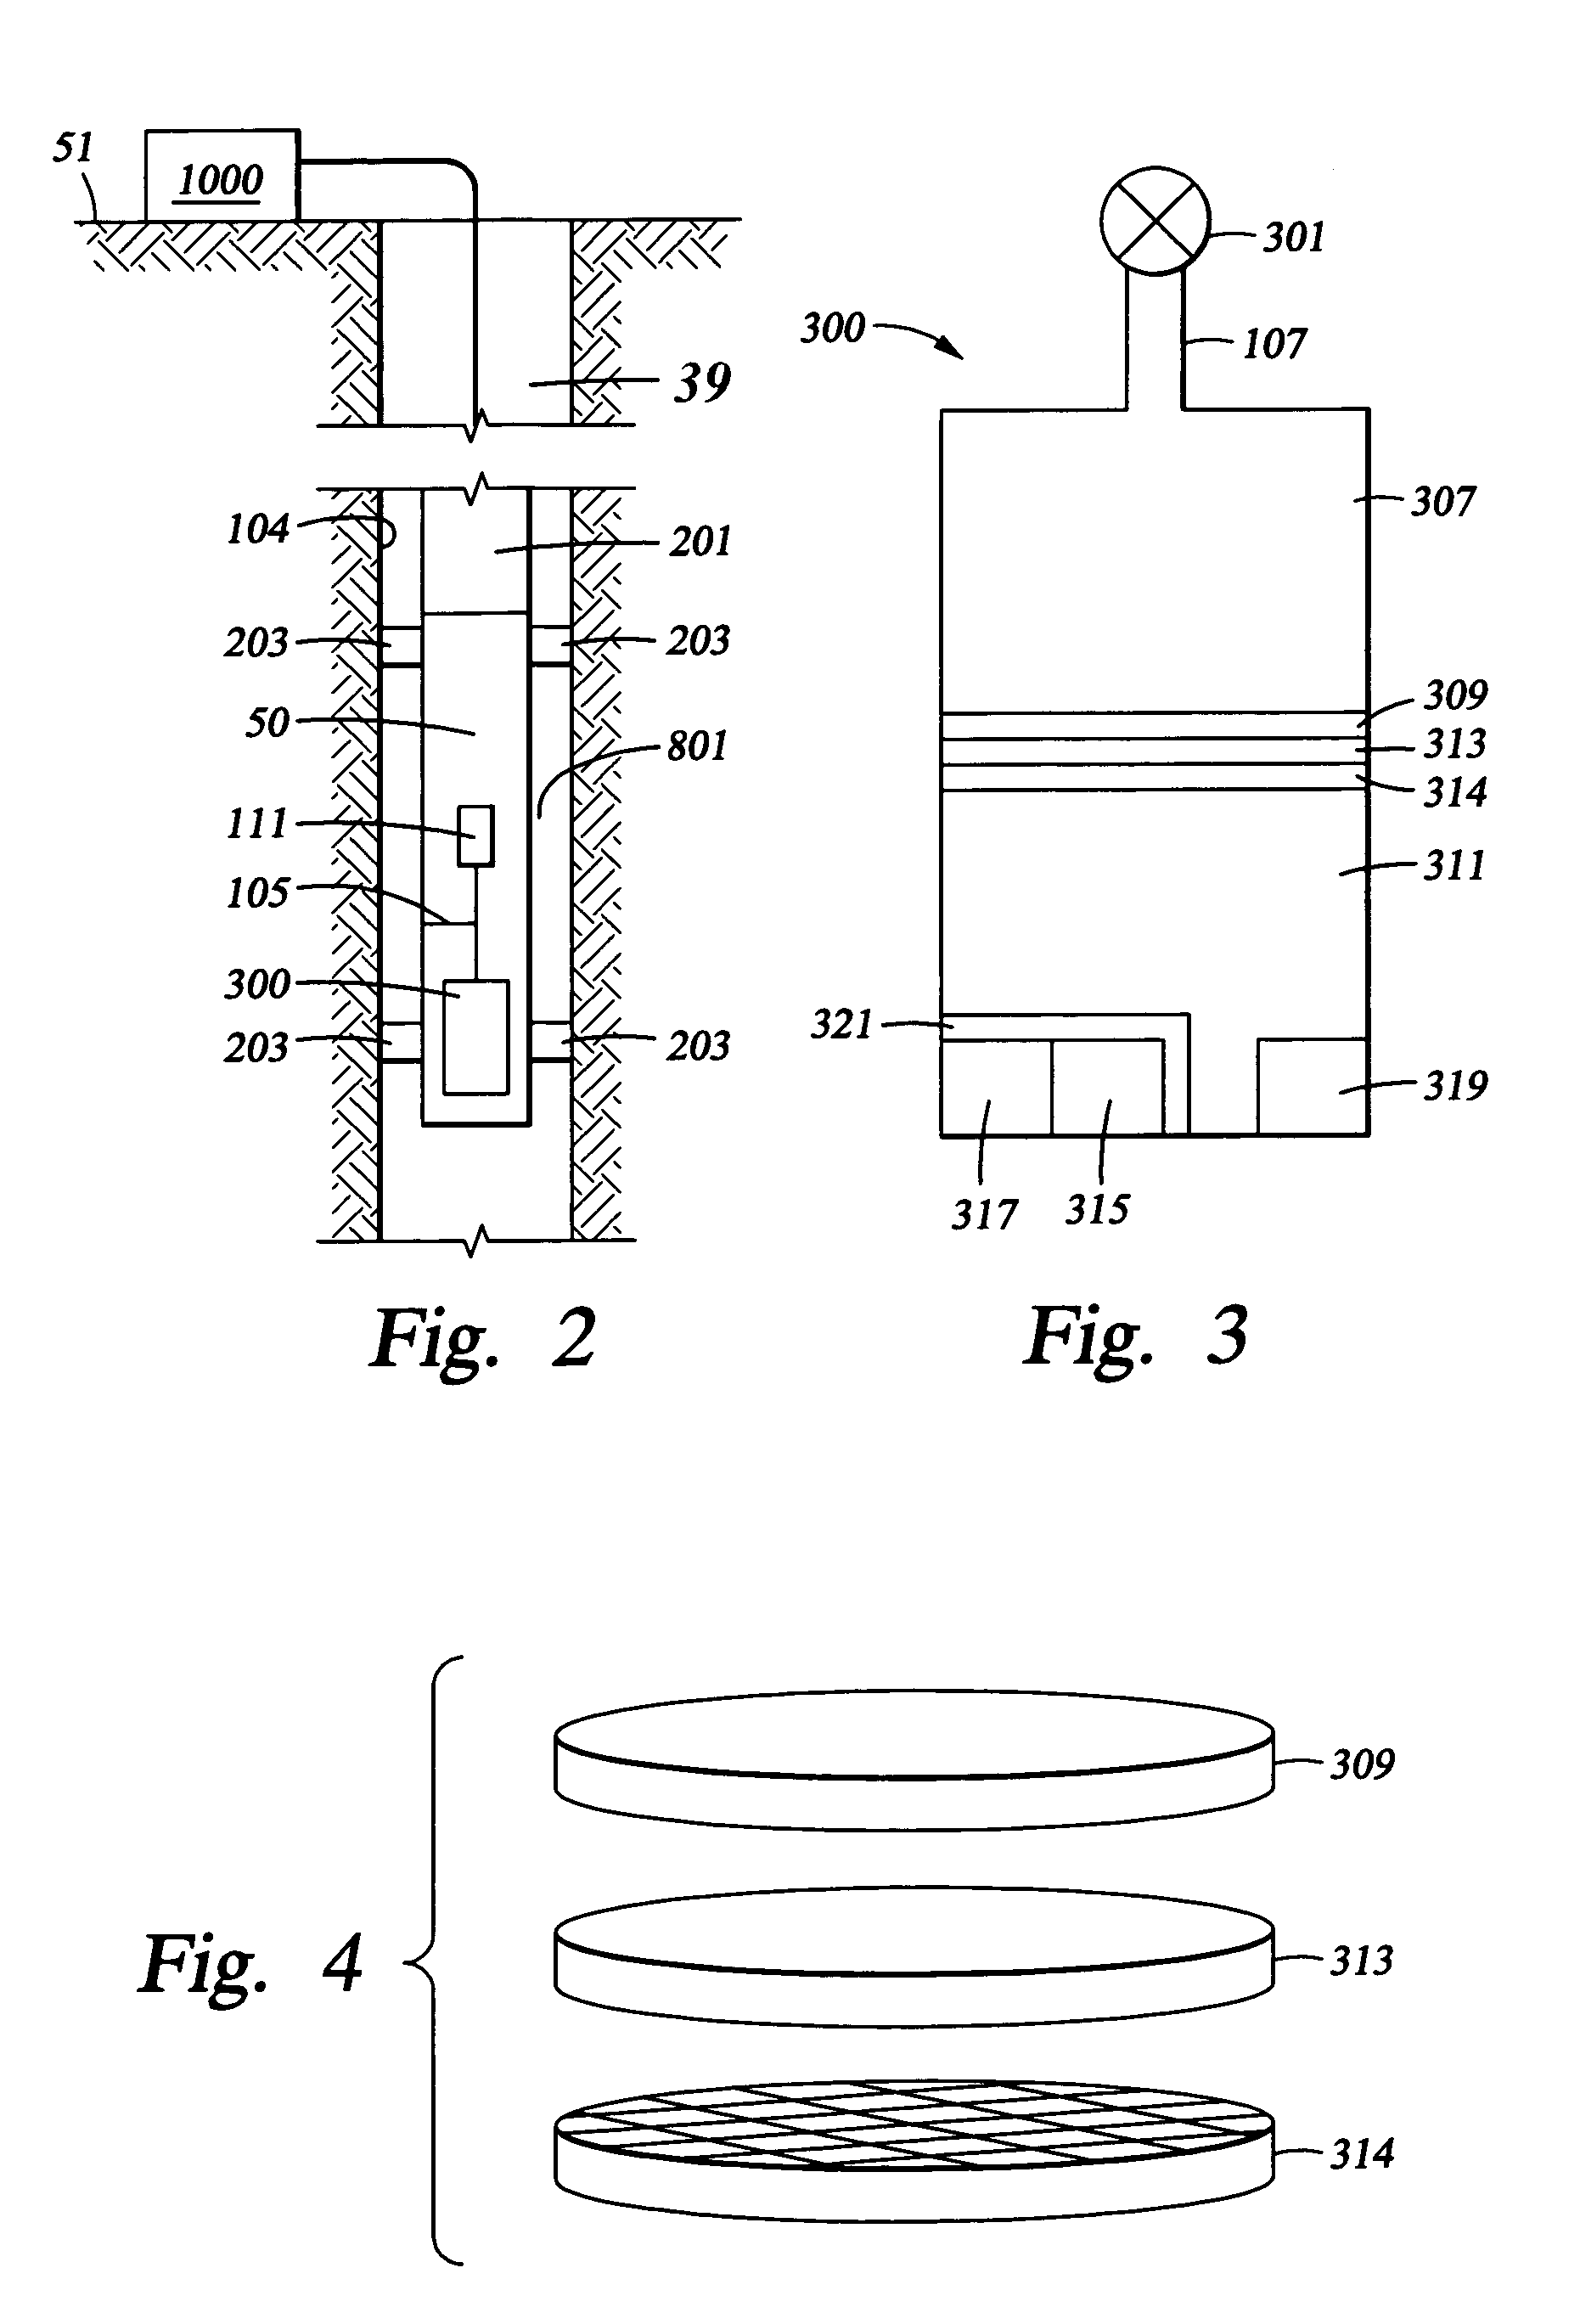 Method and apparatus for downhole fluid analysis for reservoir fluid characterization